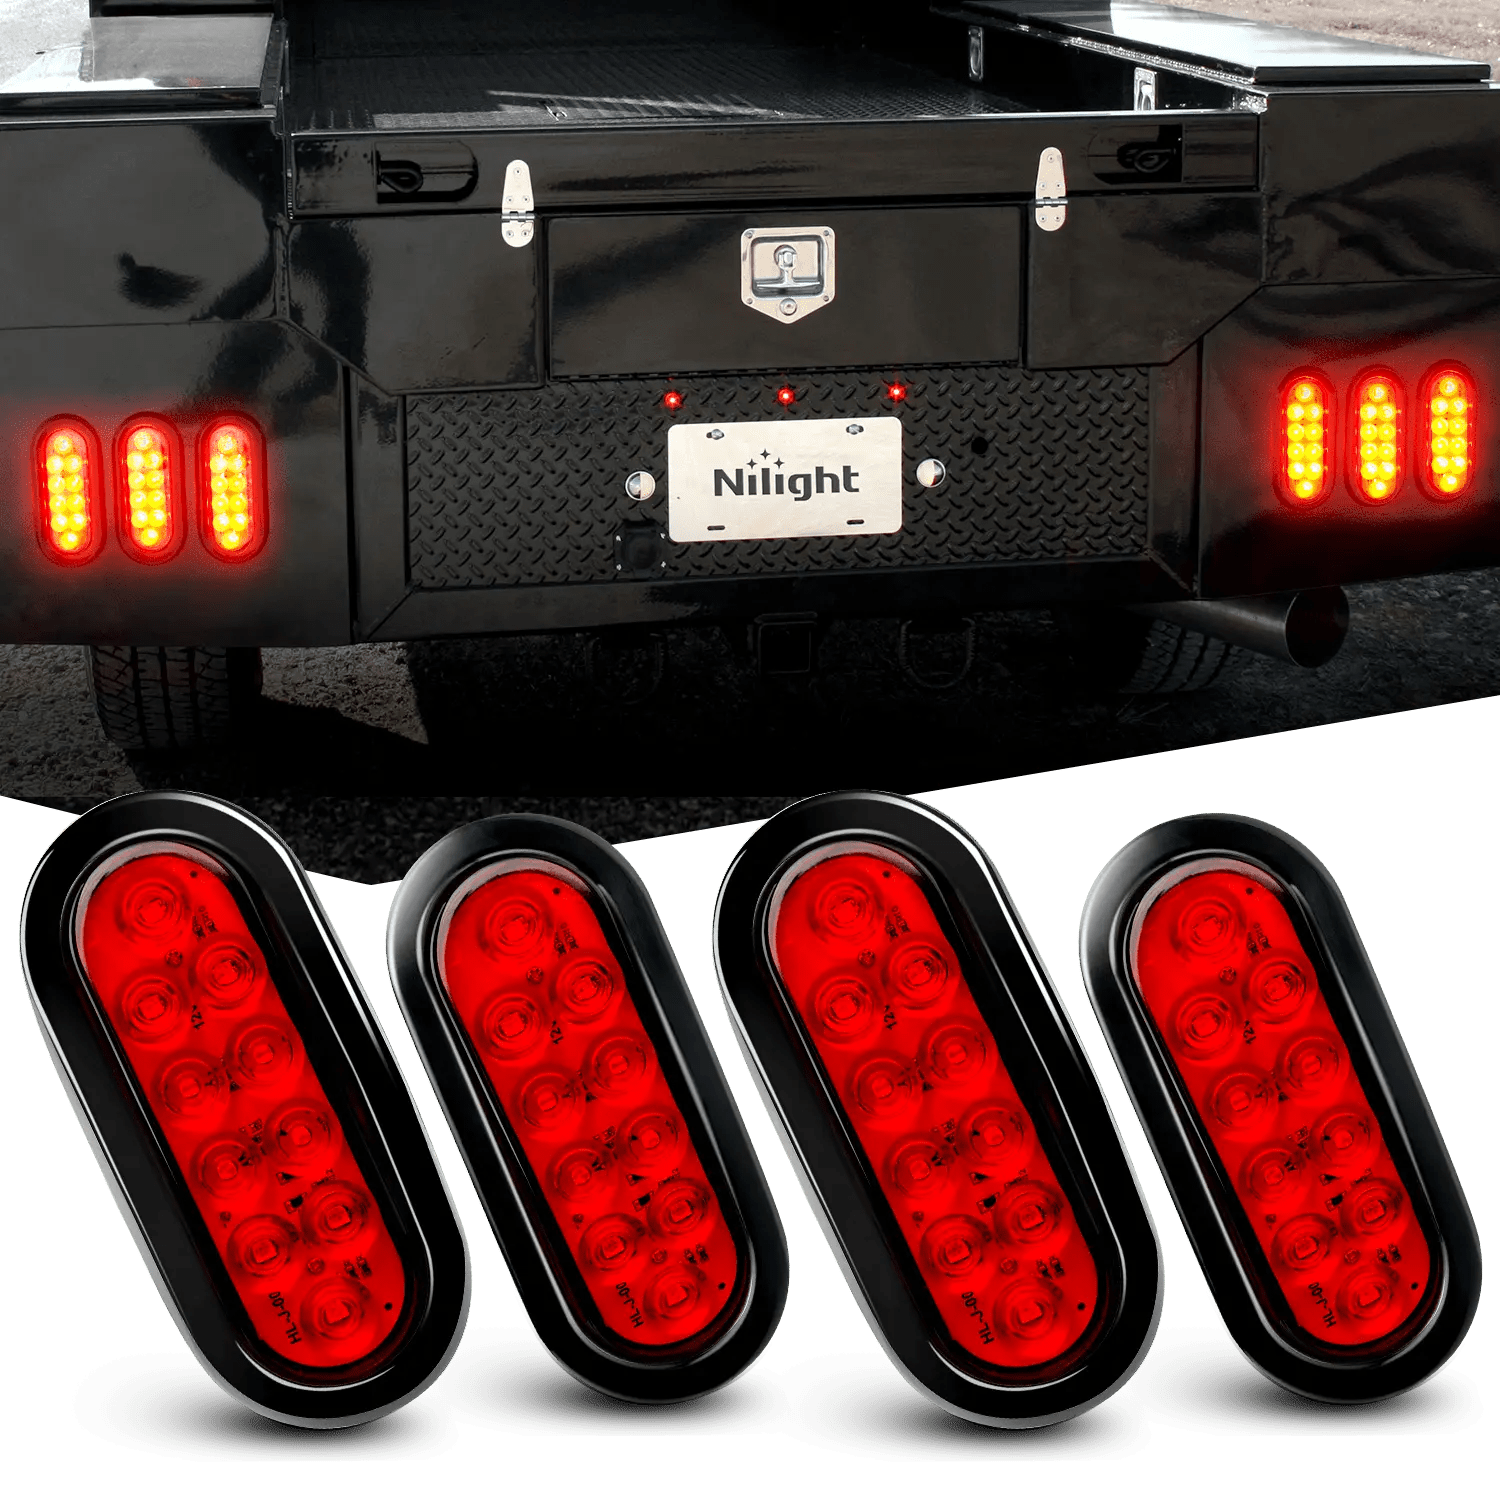 Trailer Light 6" Oval Red LED Trailer Tail Lights (2 Pairs)